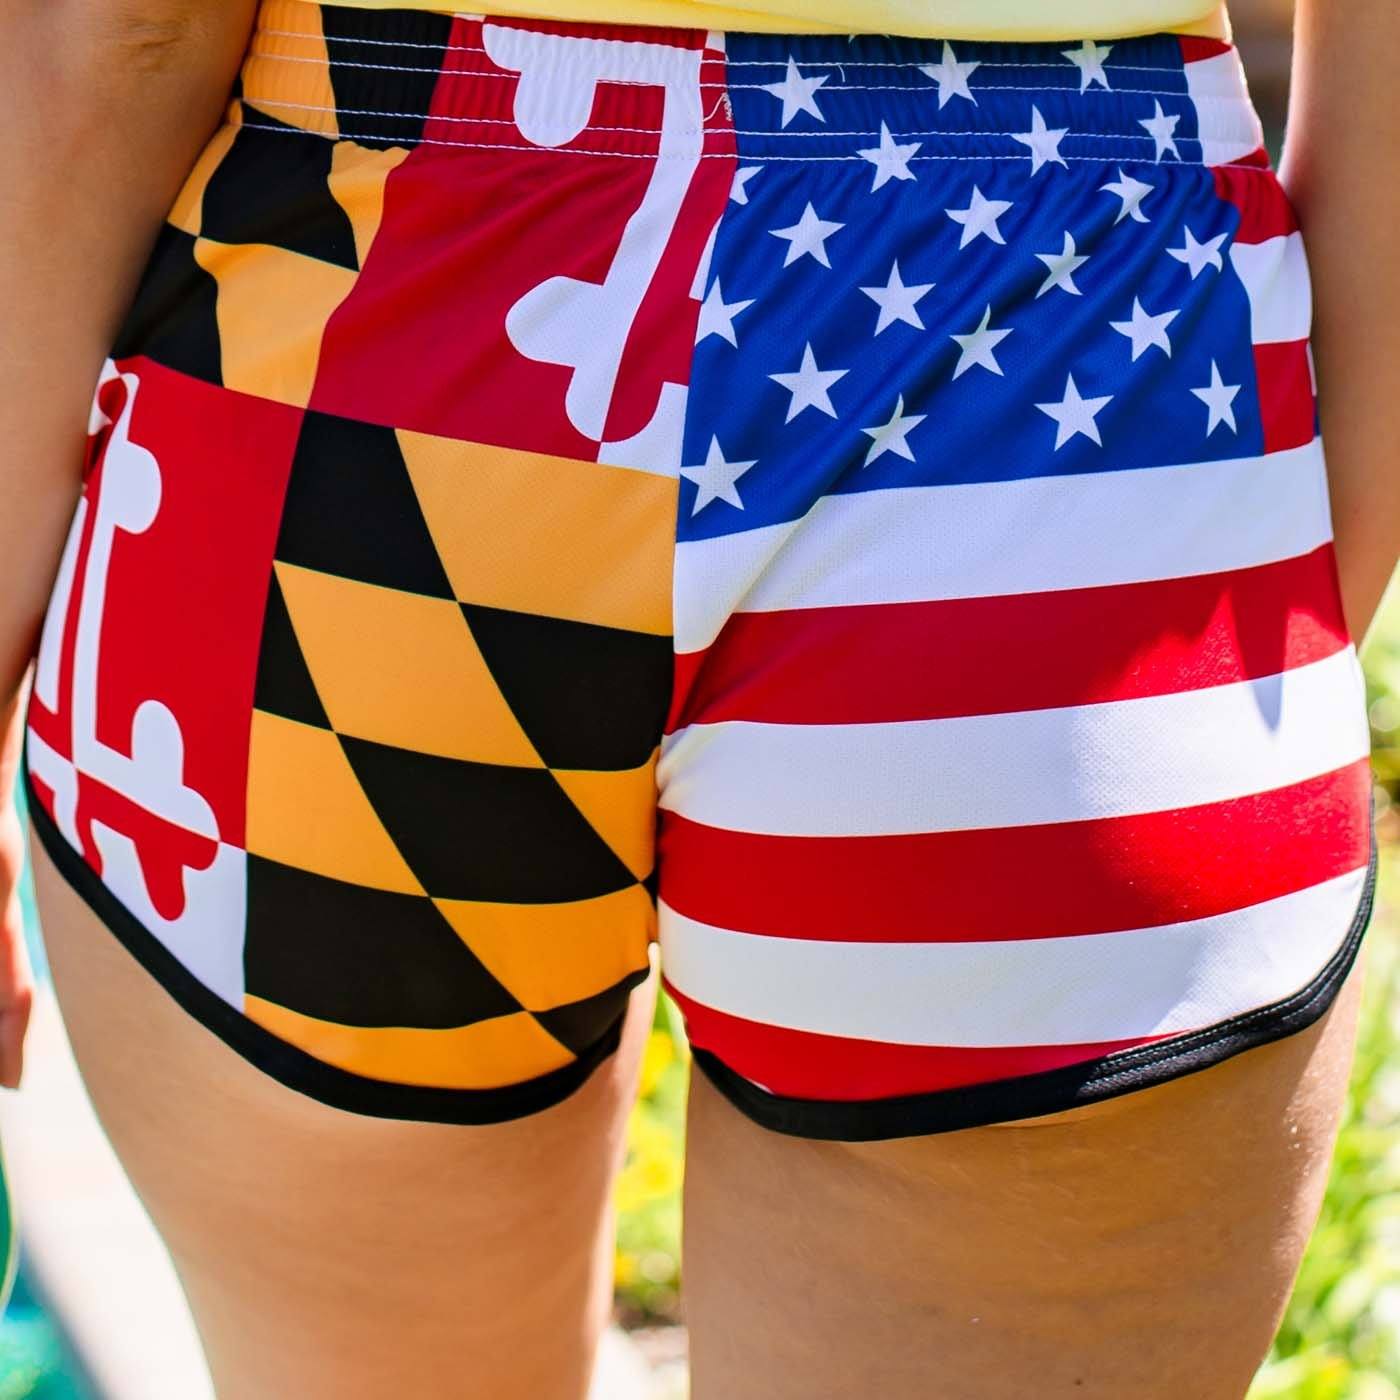 Women's American Flag Fit Shorts